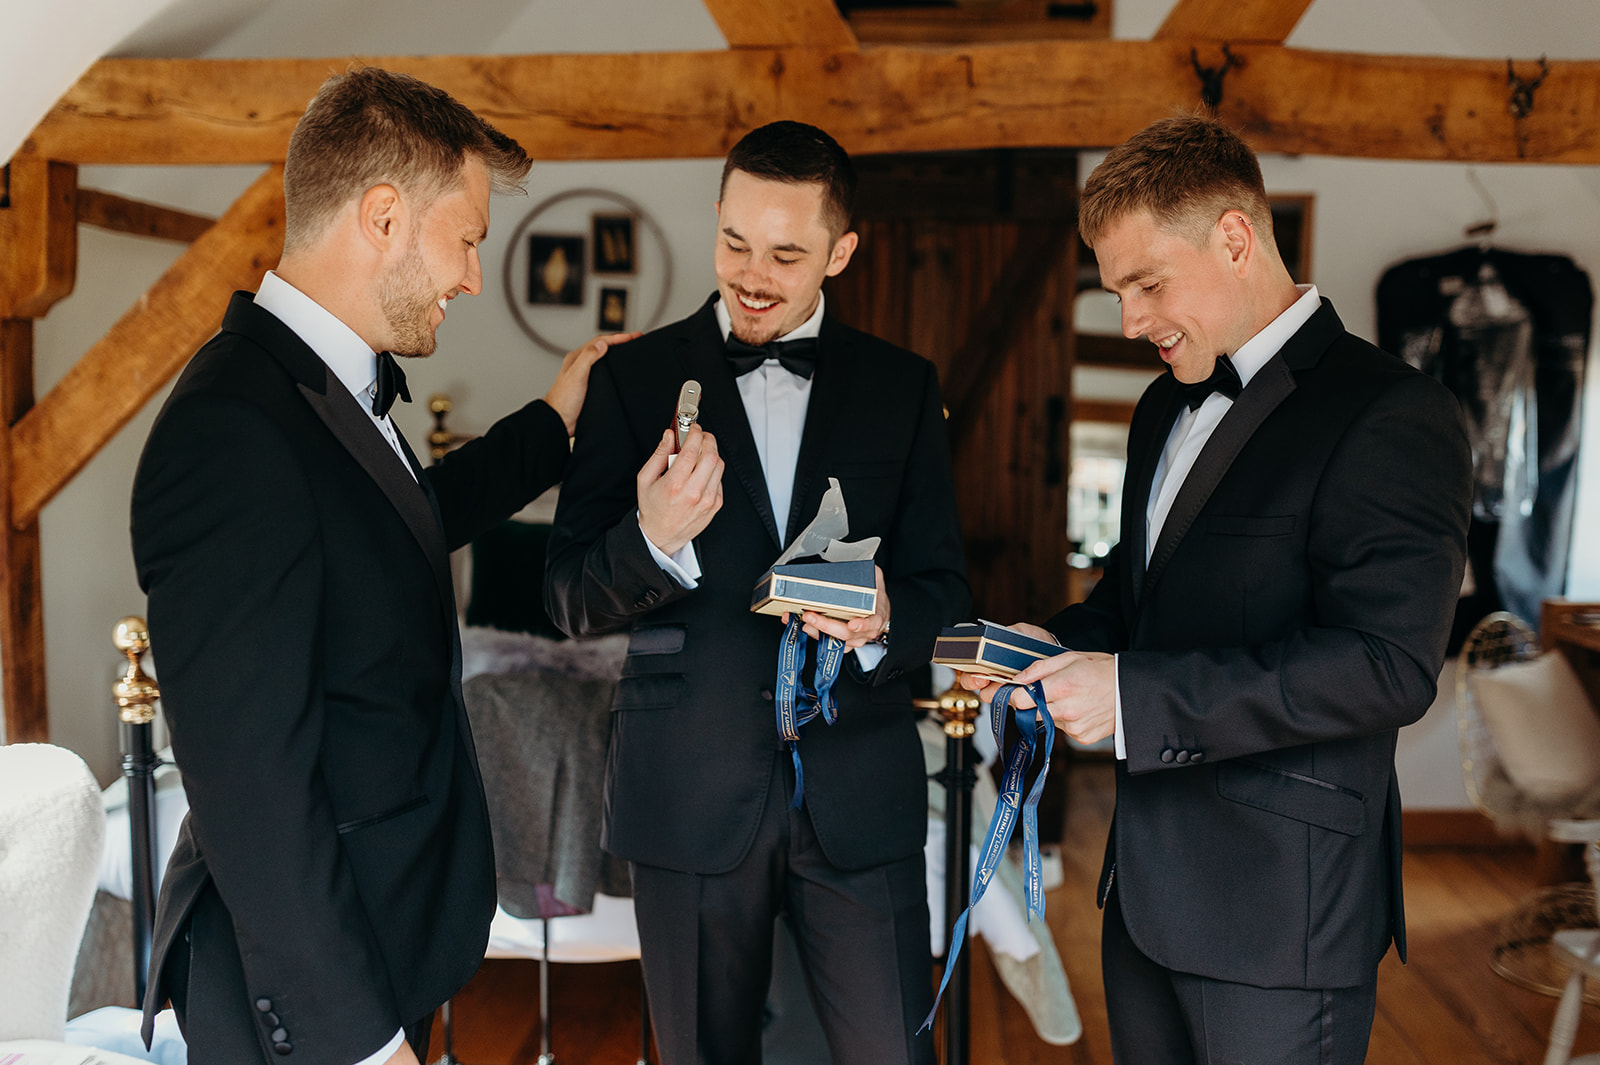 Groom and groomsmen exchanging gift before the wedding ceremony in Hampshire.
